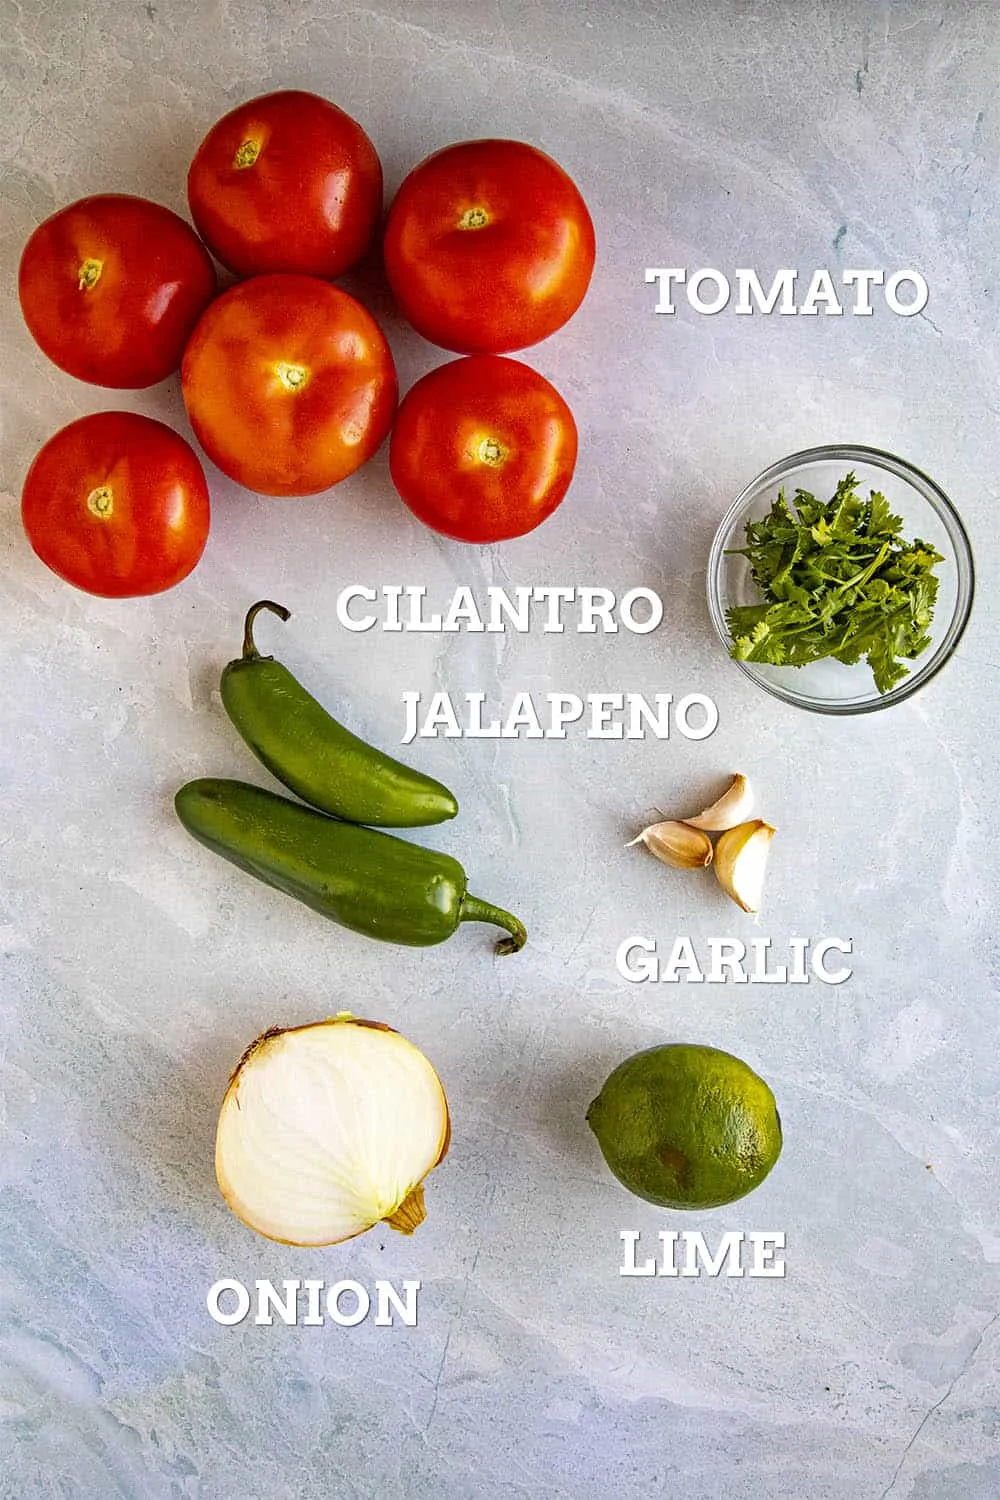 Ingredients for making salsa roja, including tomato, cilantro, jalapeno, onion, garlic and lime